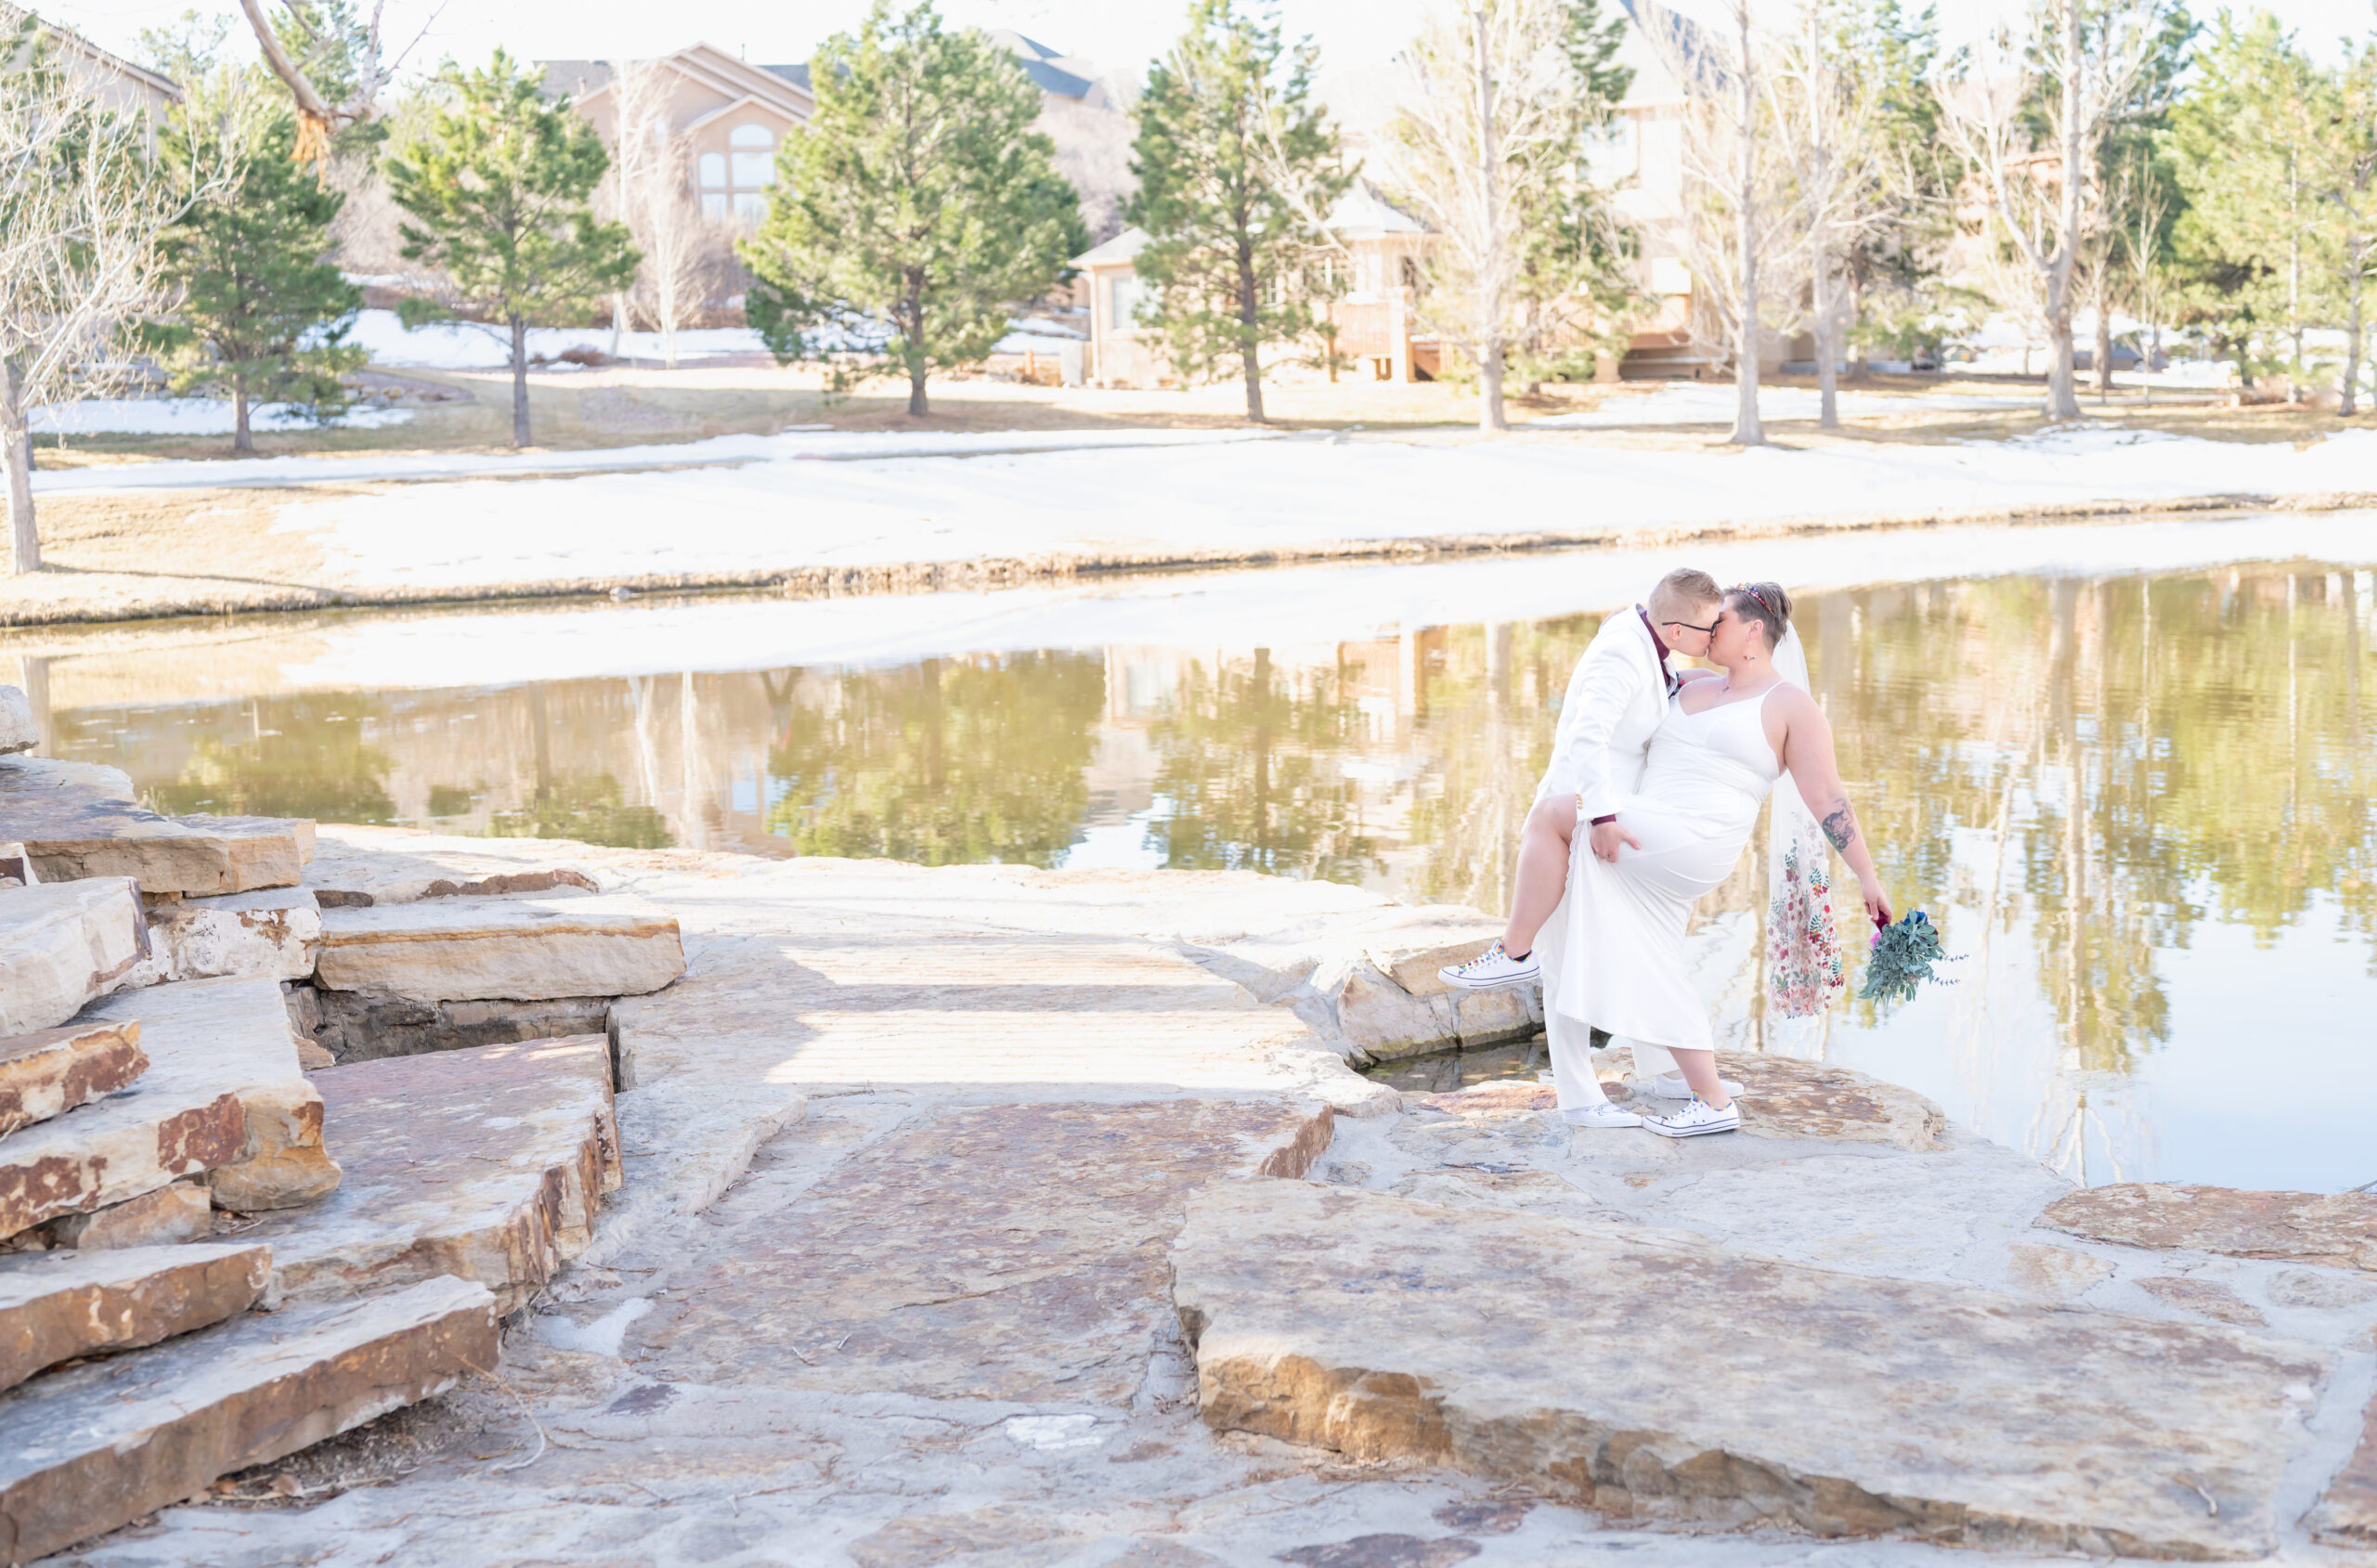 Bride dipping her bride for a romantic dip kiss with the pond view behind them to celebrate their Colorado Elopement Day